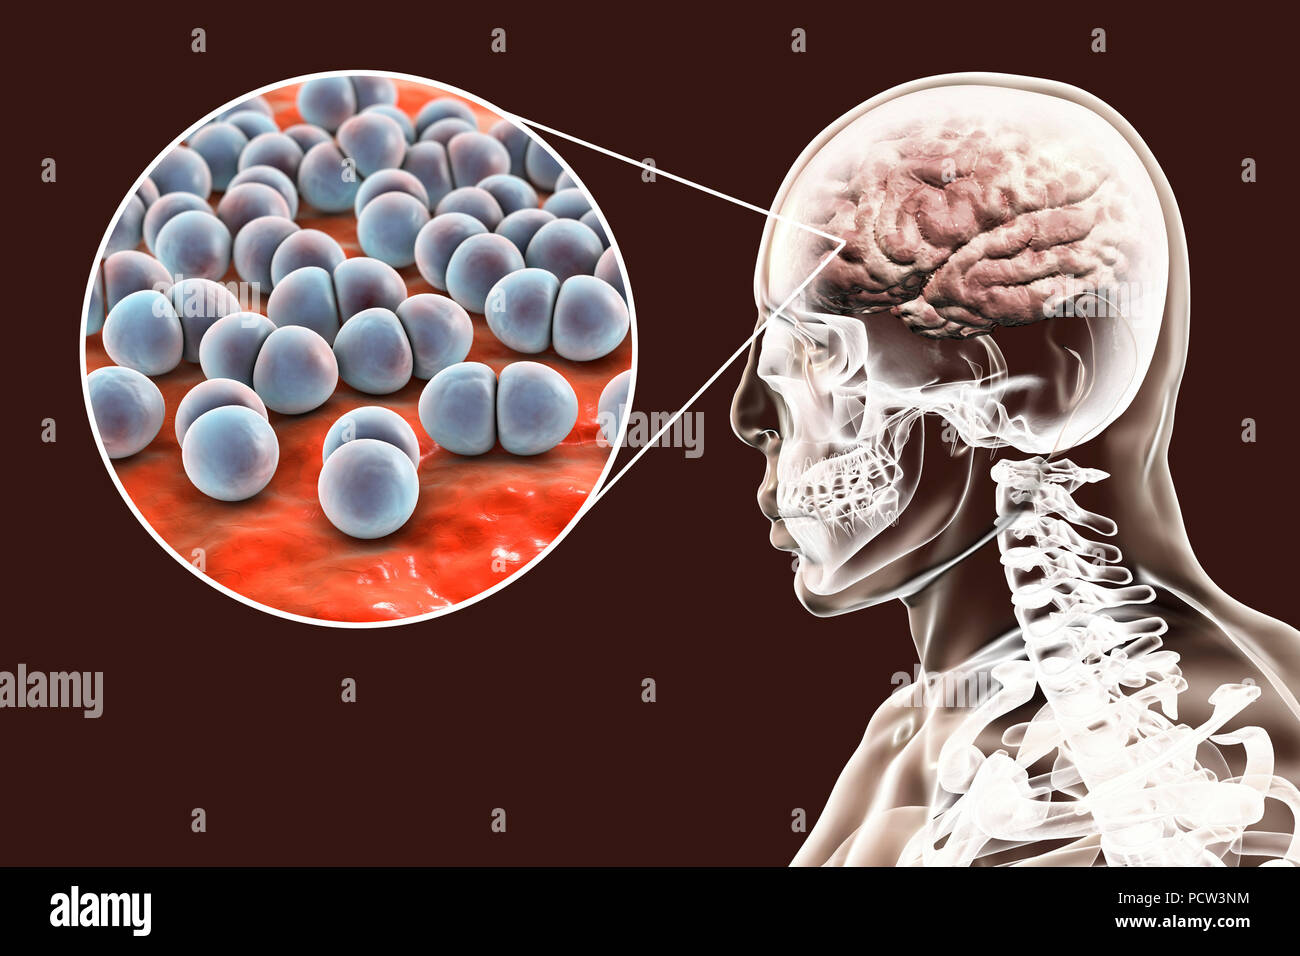 Brain infection caused by Streptococcus pneumoniae bacteria, computer illustration. S. pneumoniae are Gram-positive bacteria arranged in pairs (diplococci), they are common causative agents of infections of different location, including bacterial meningitis, meningoencephalitis and encephalitis. Stock Photo